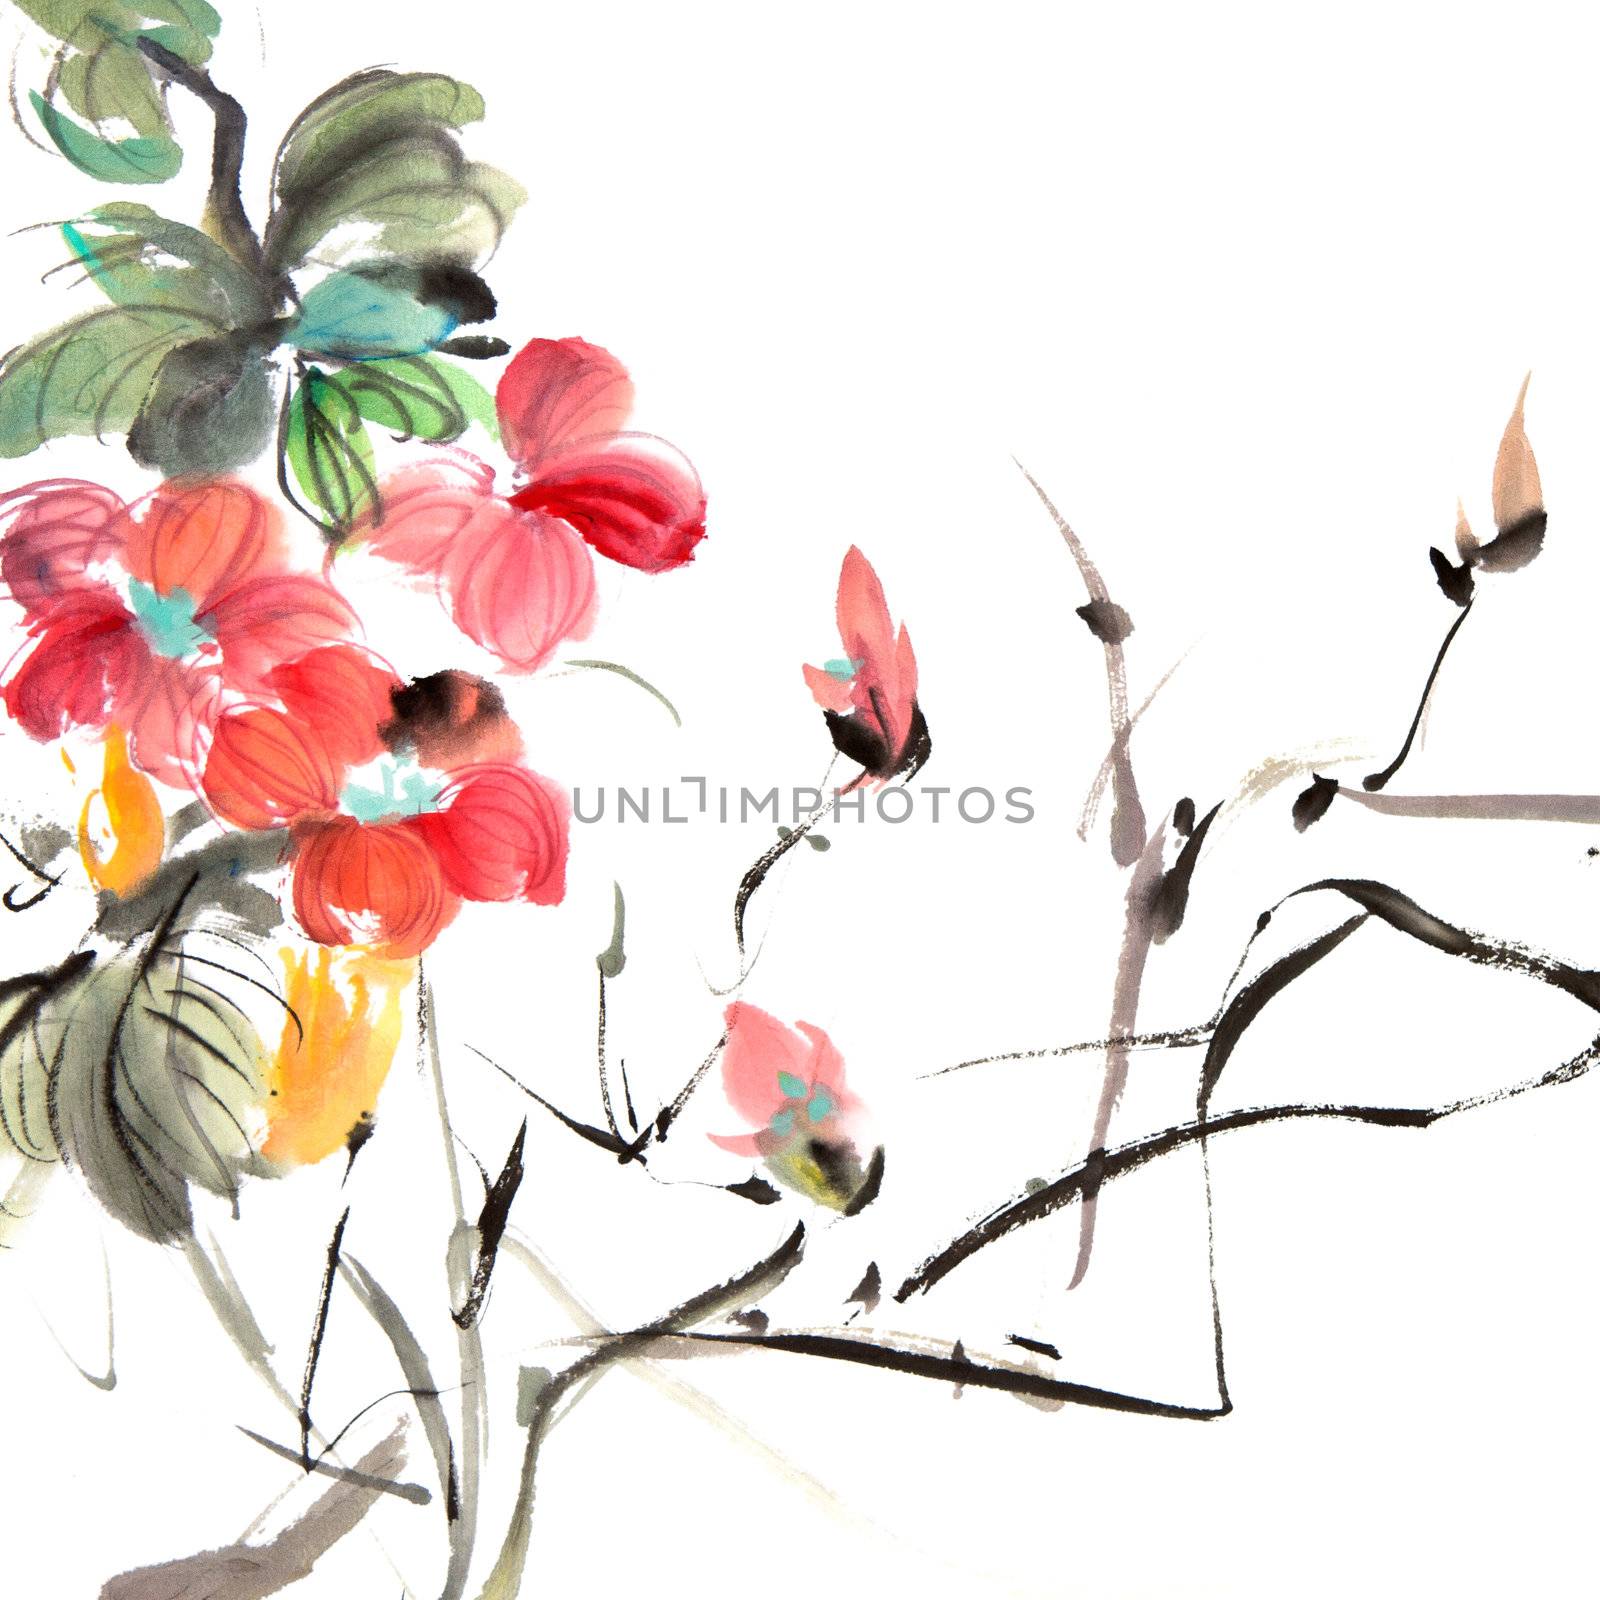 Chinese traditional painting of ink artwork with colorful flowers on white art paper.